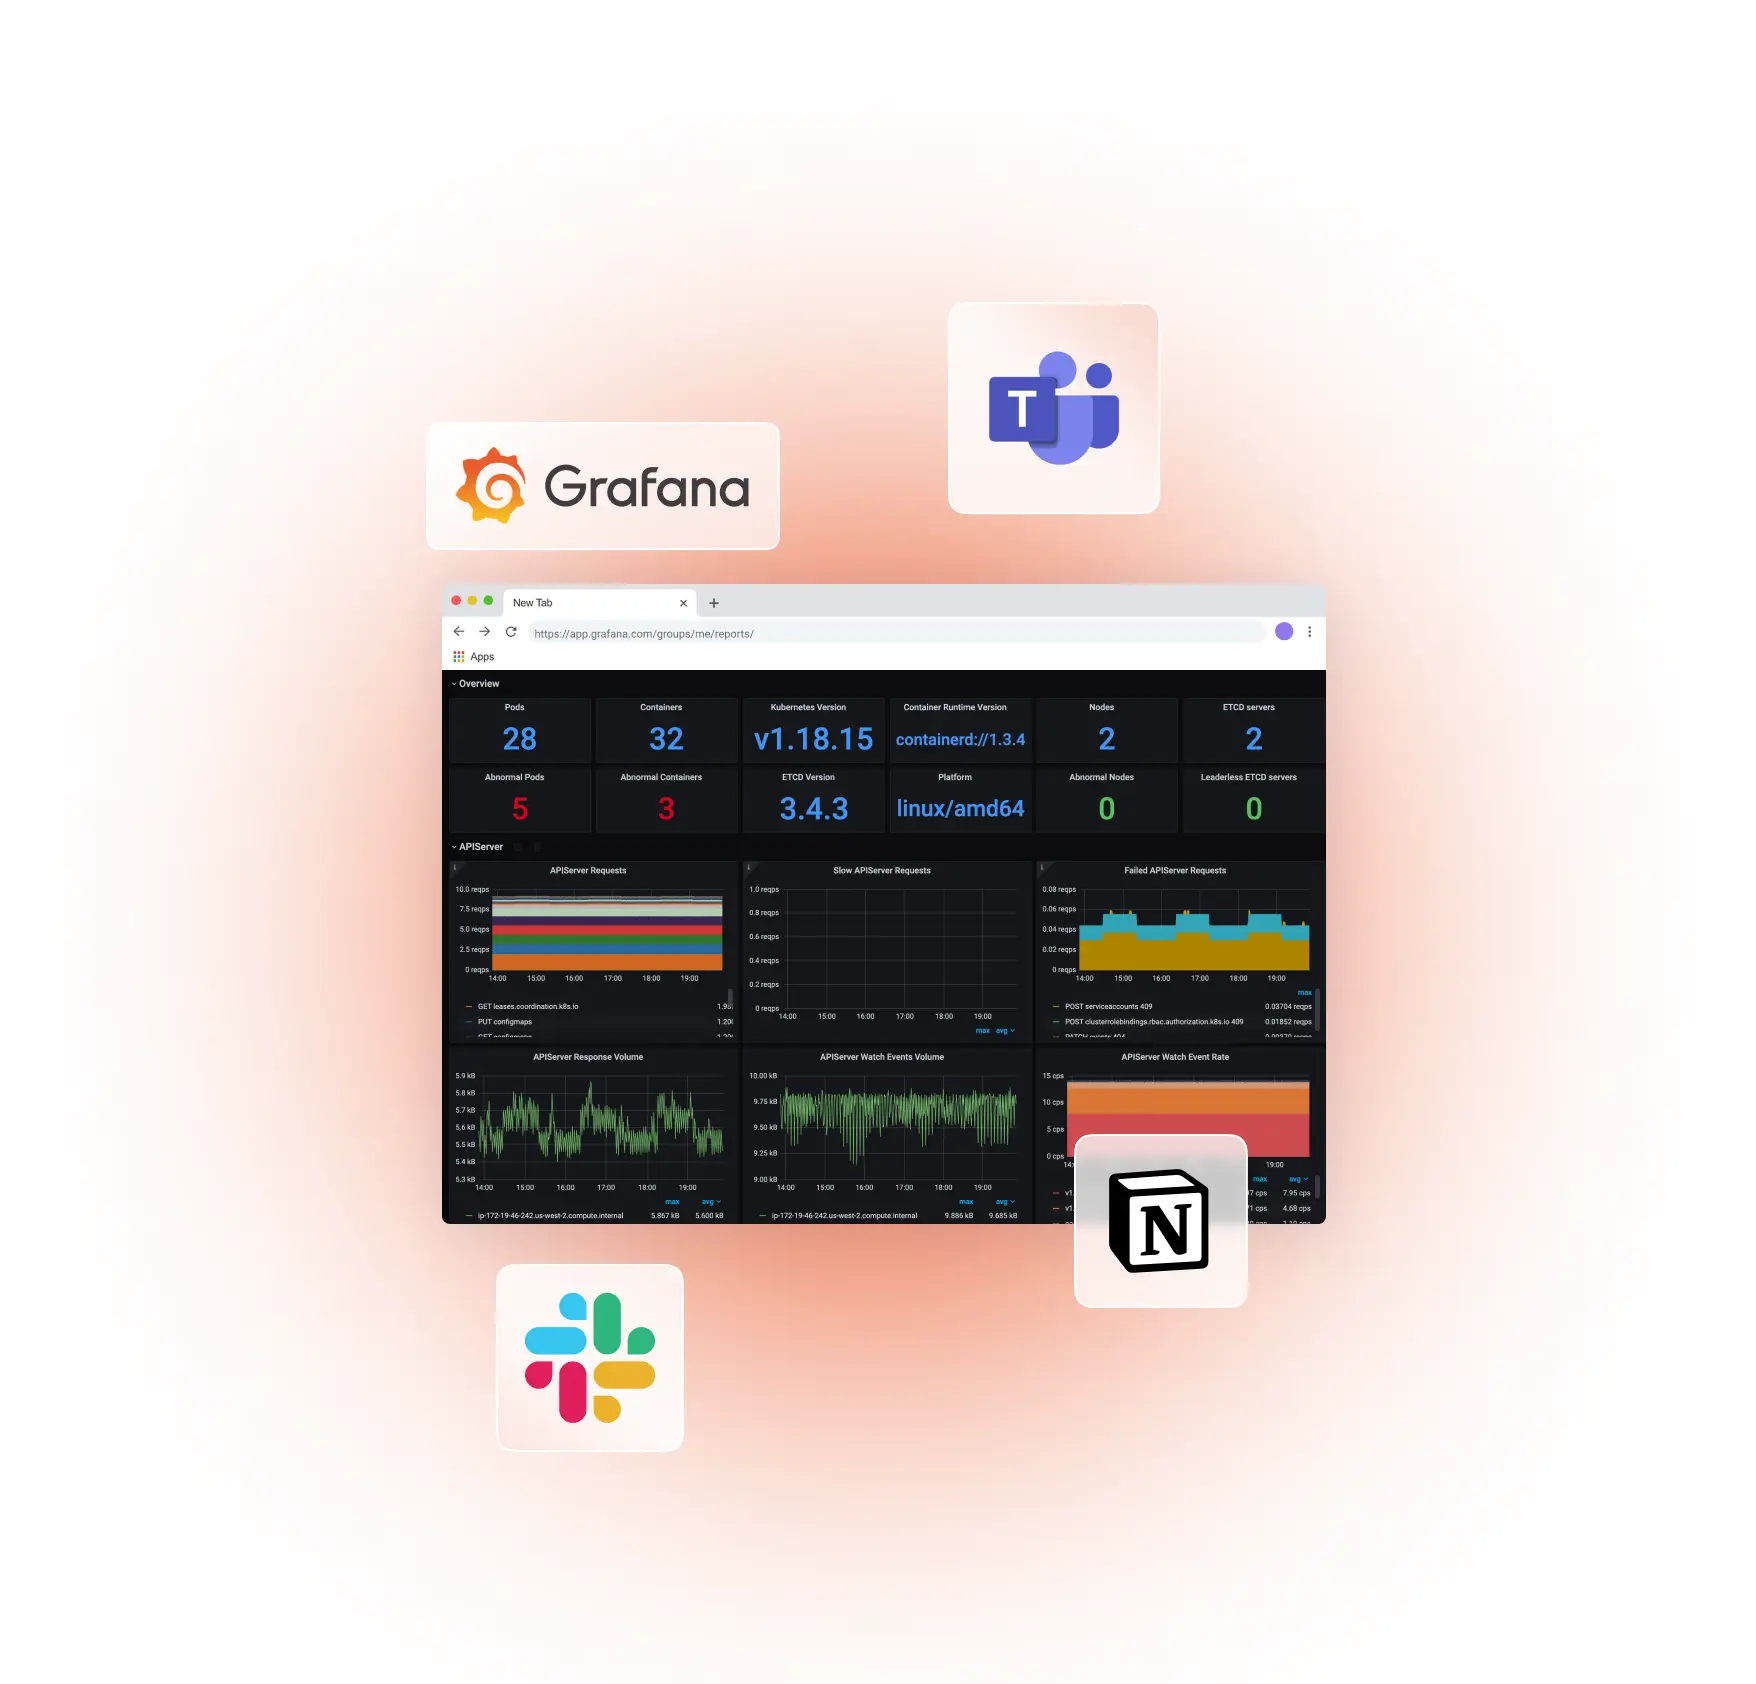 A Grafana dashboard is open in a browser tab